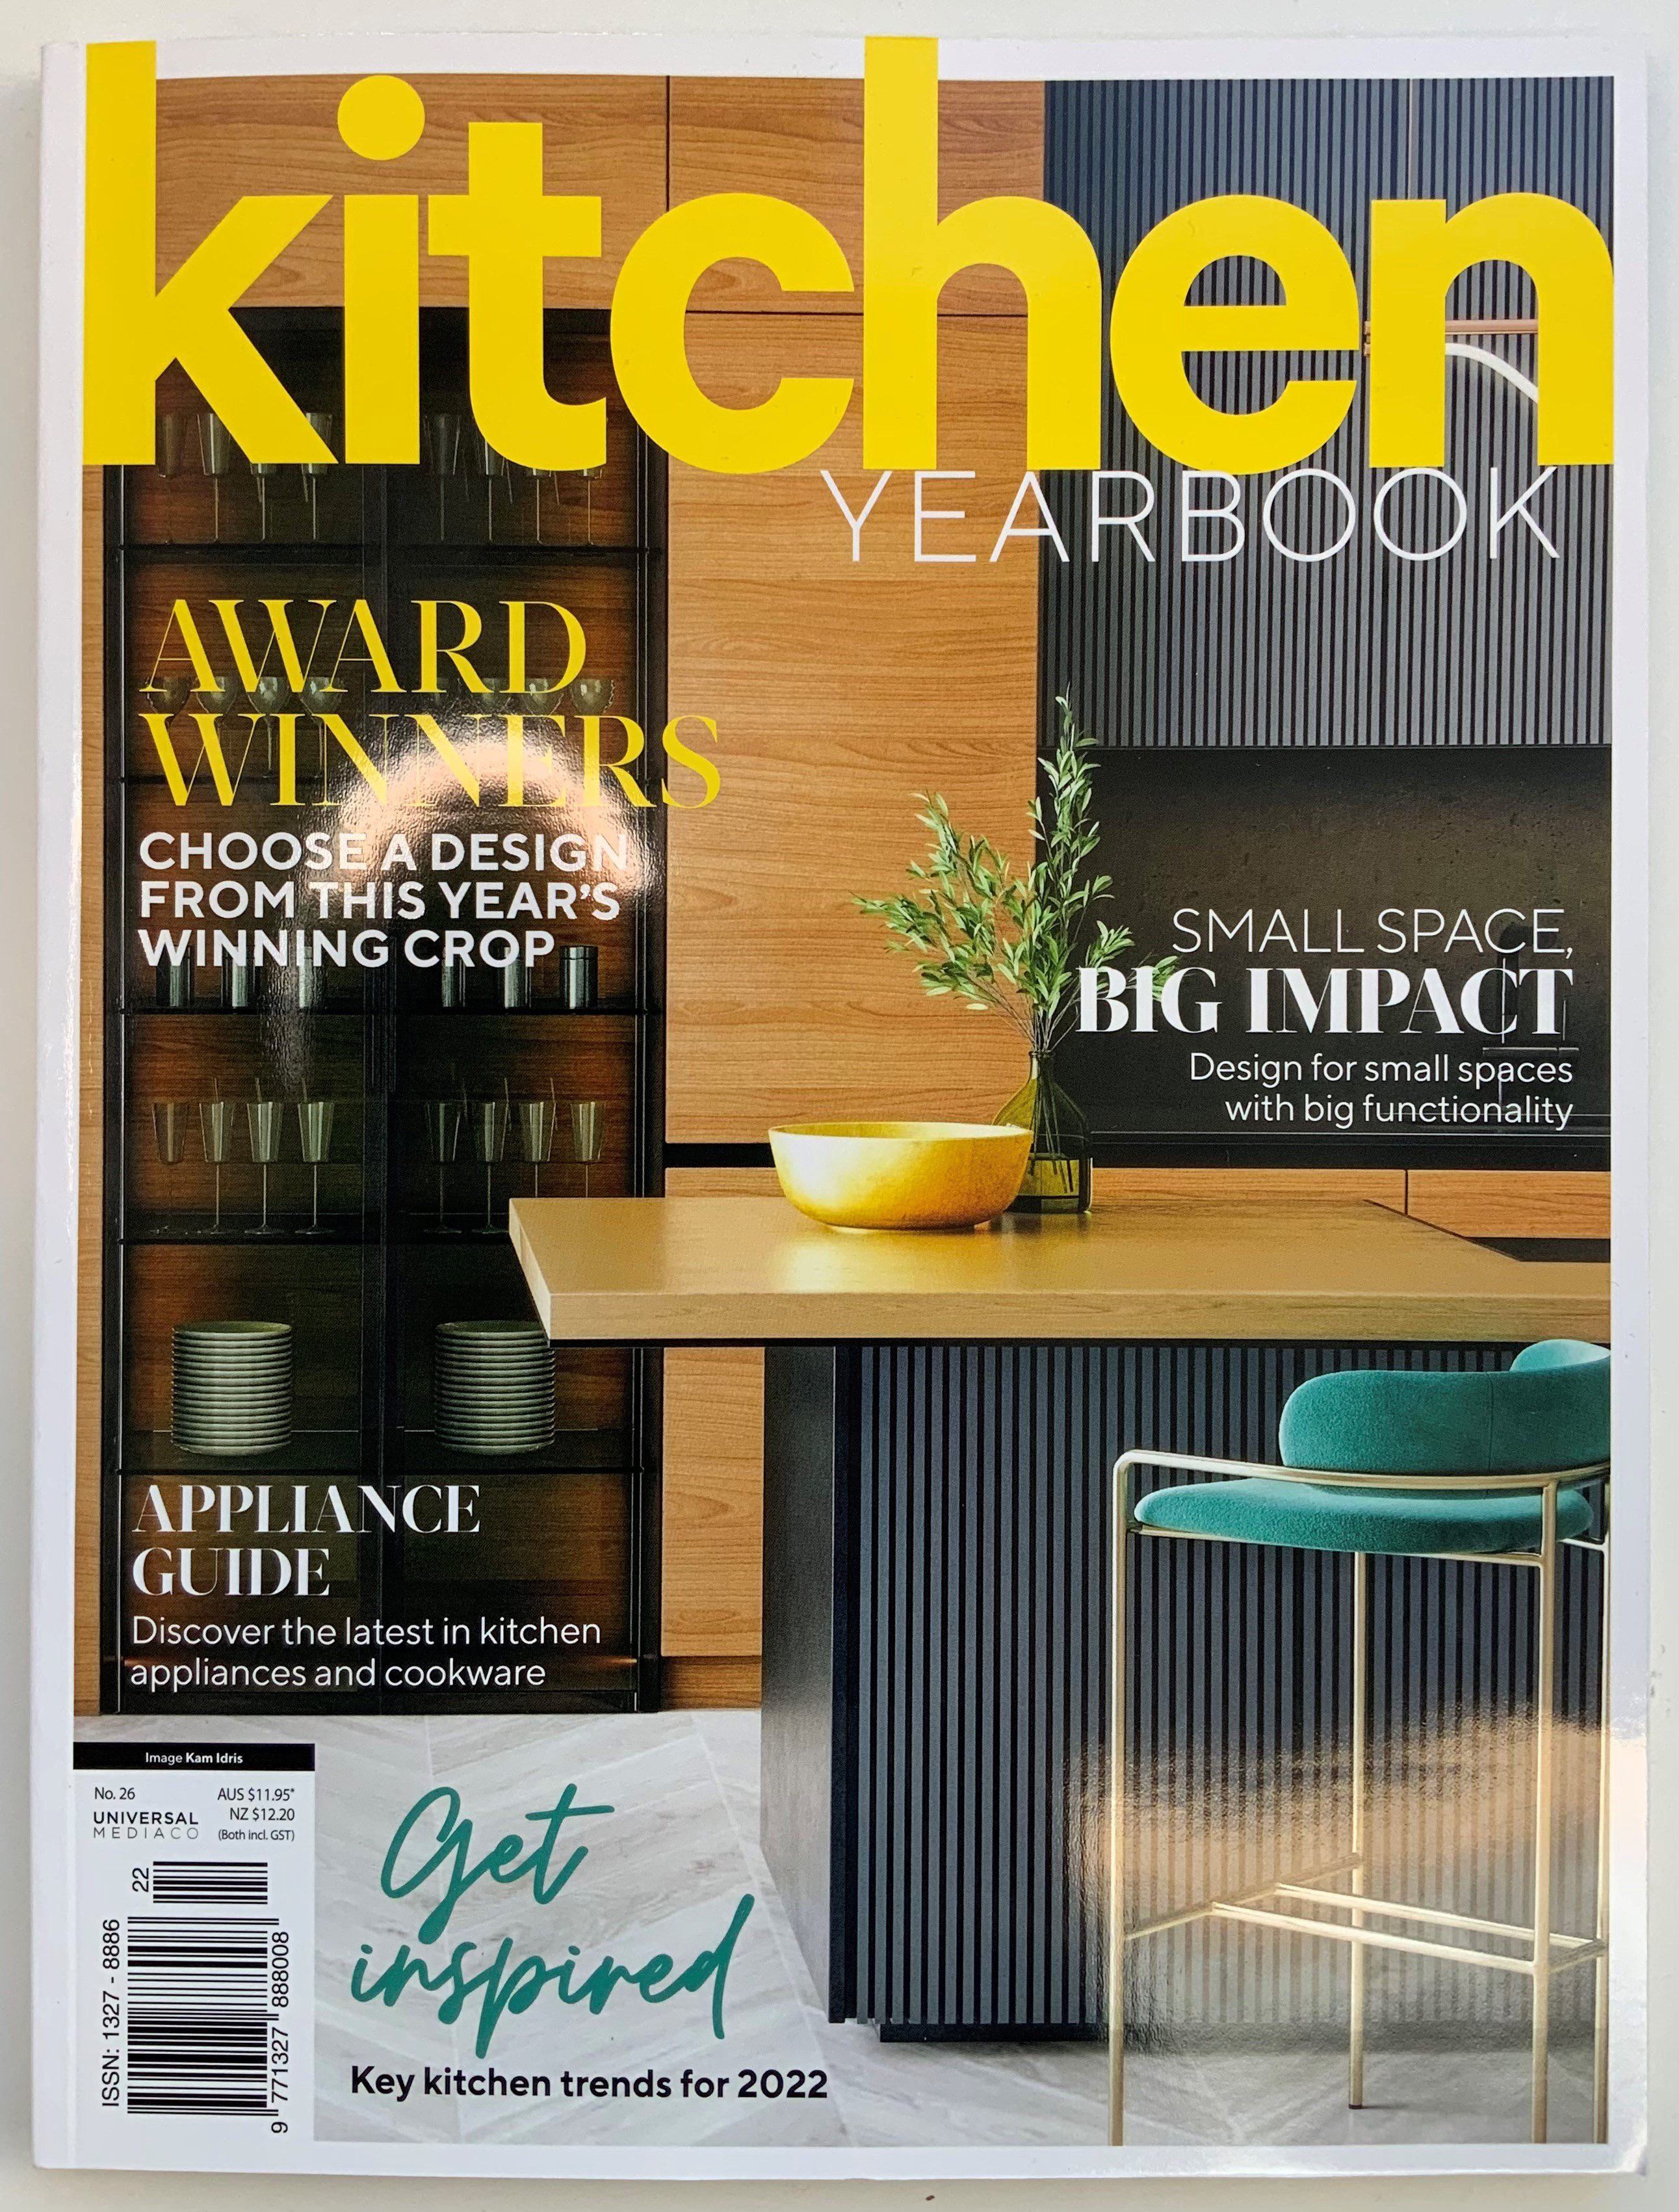 Lane Cove Project featured in the annual Kitchen Yearbook